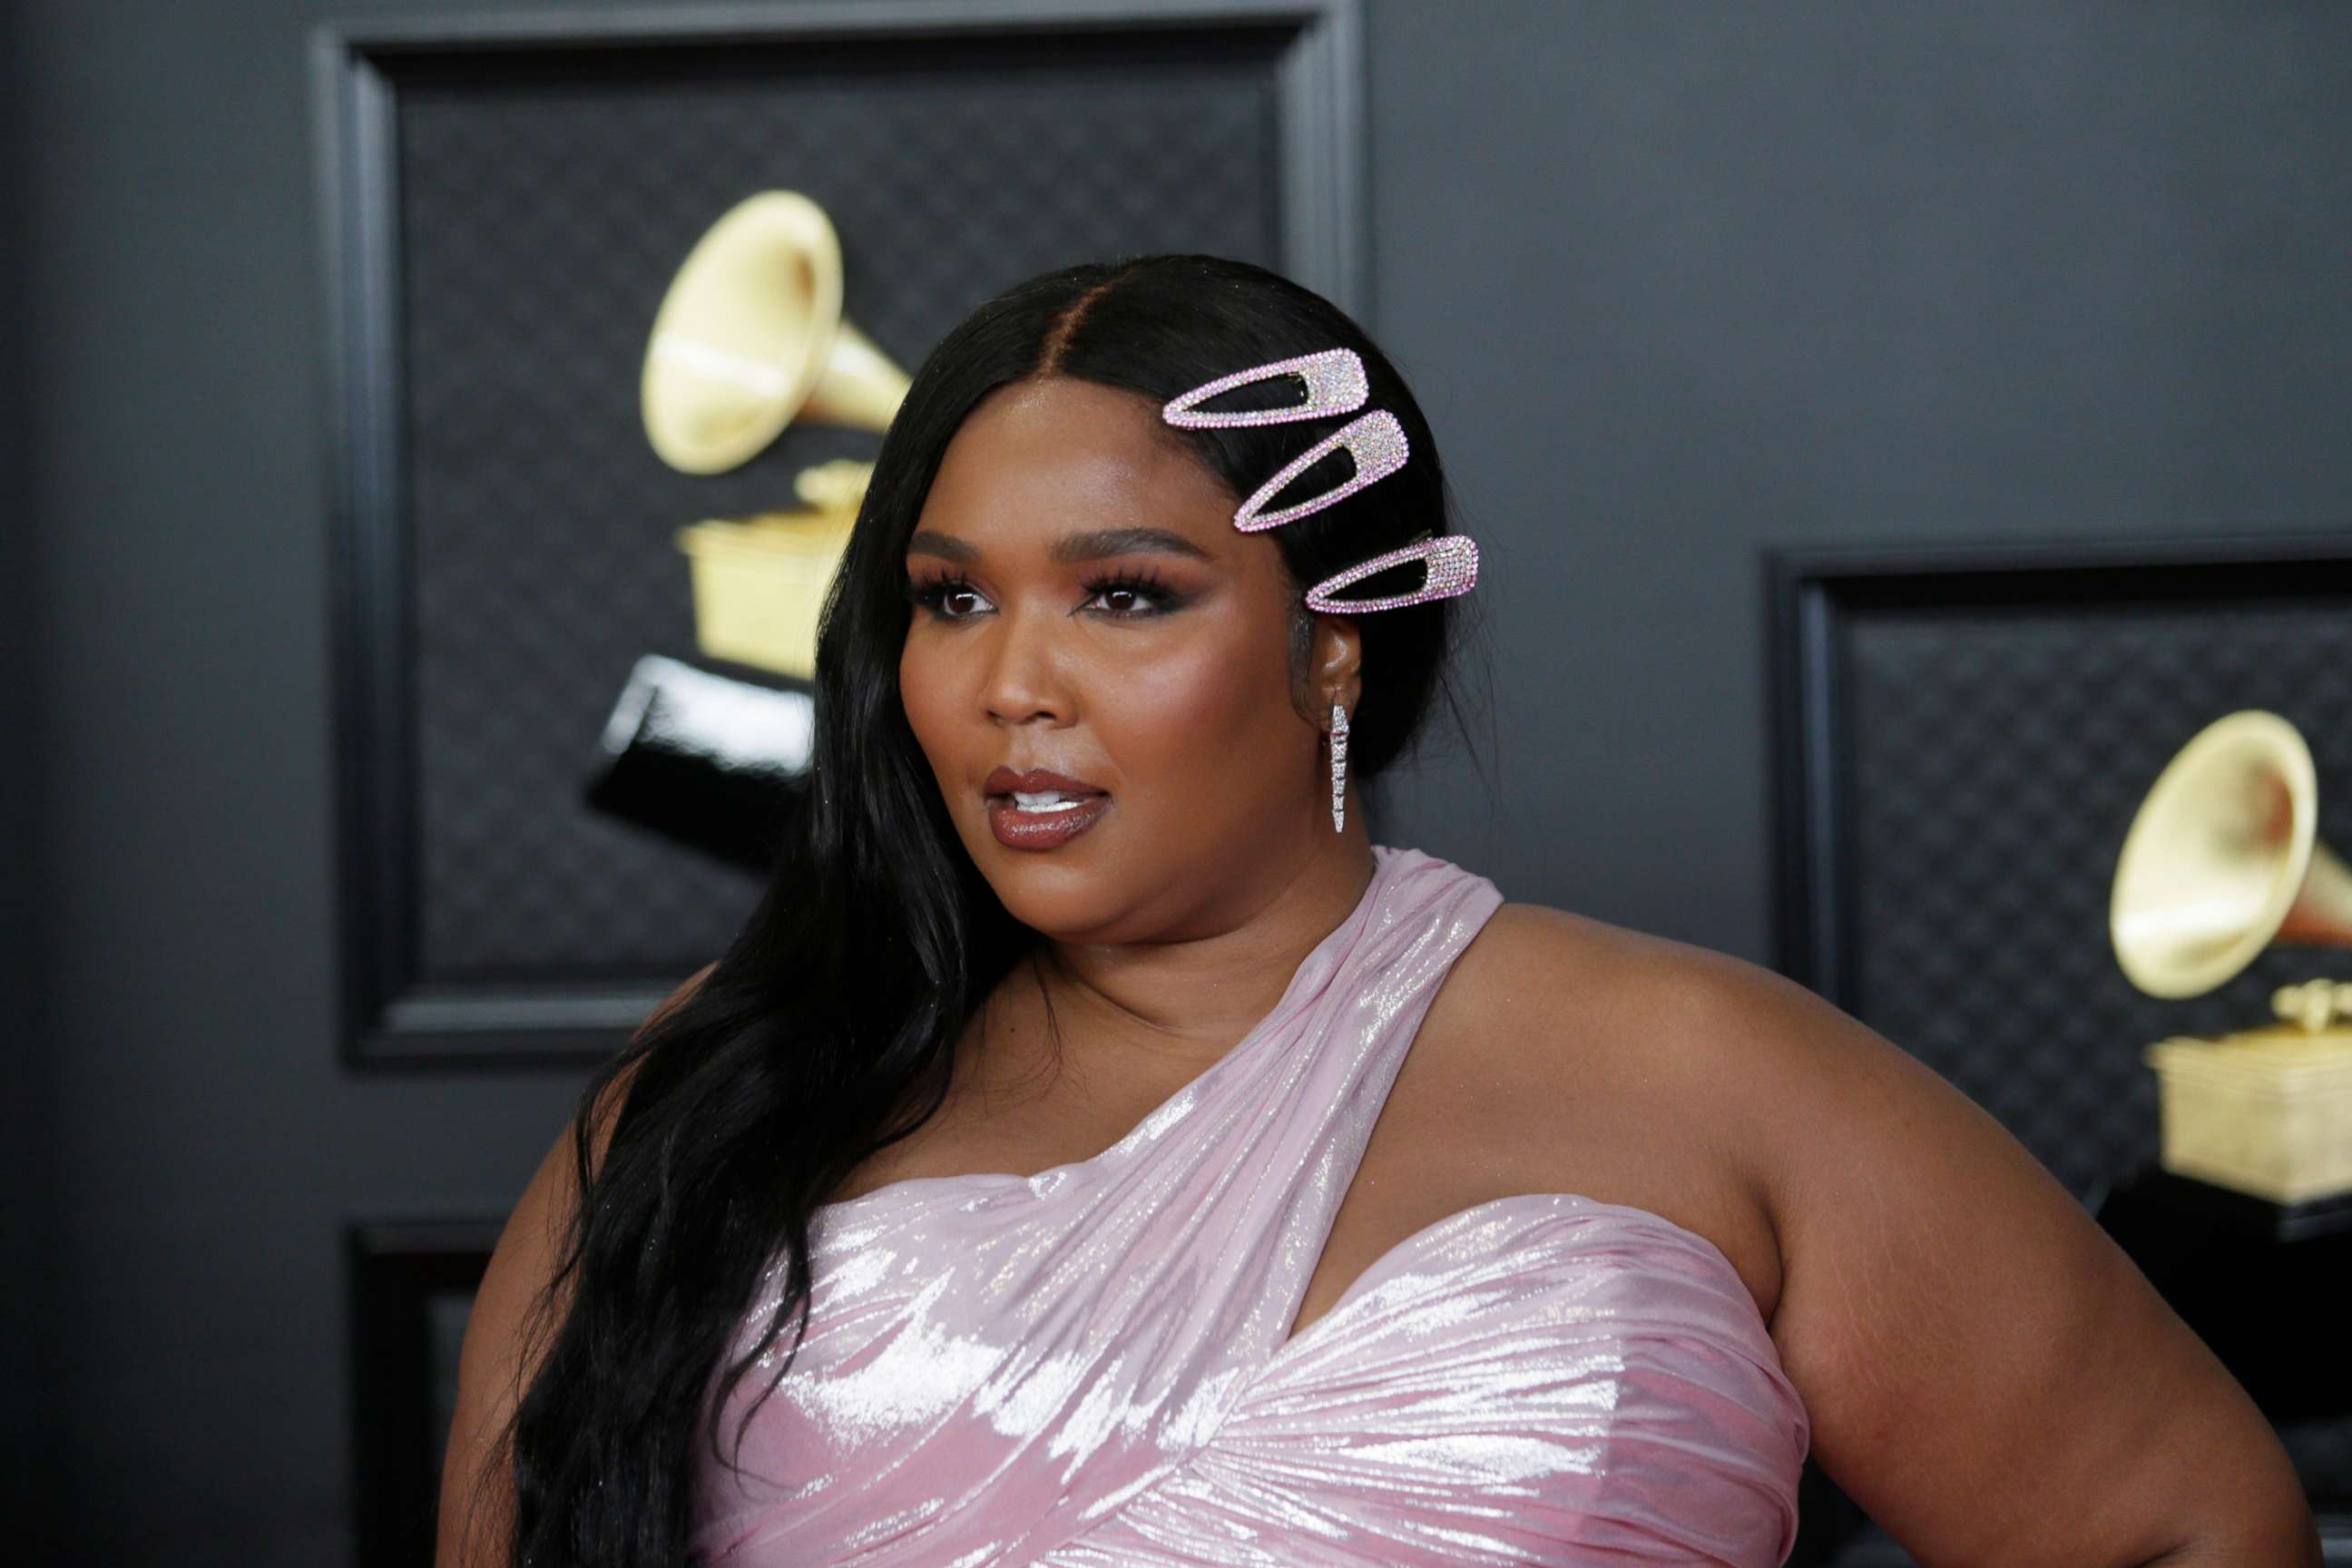 PHOTO: In this March 14, 2021, file photo, Lizzo attends the Grammy Awards in Los Angeles.